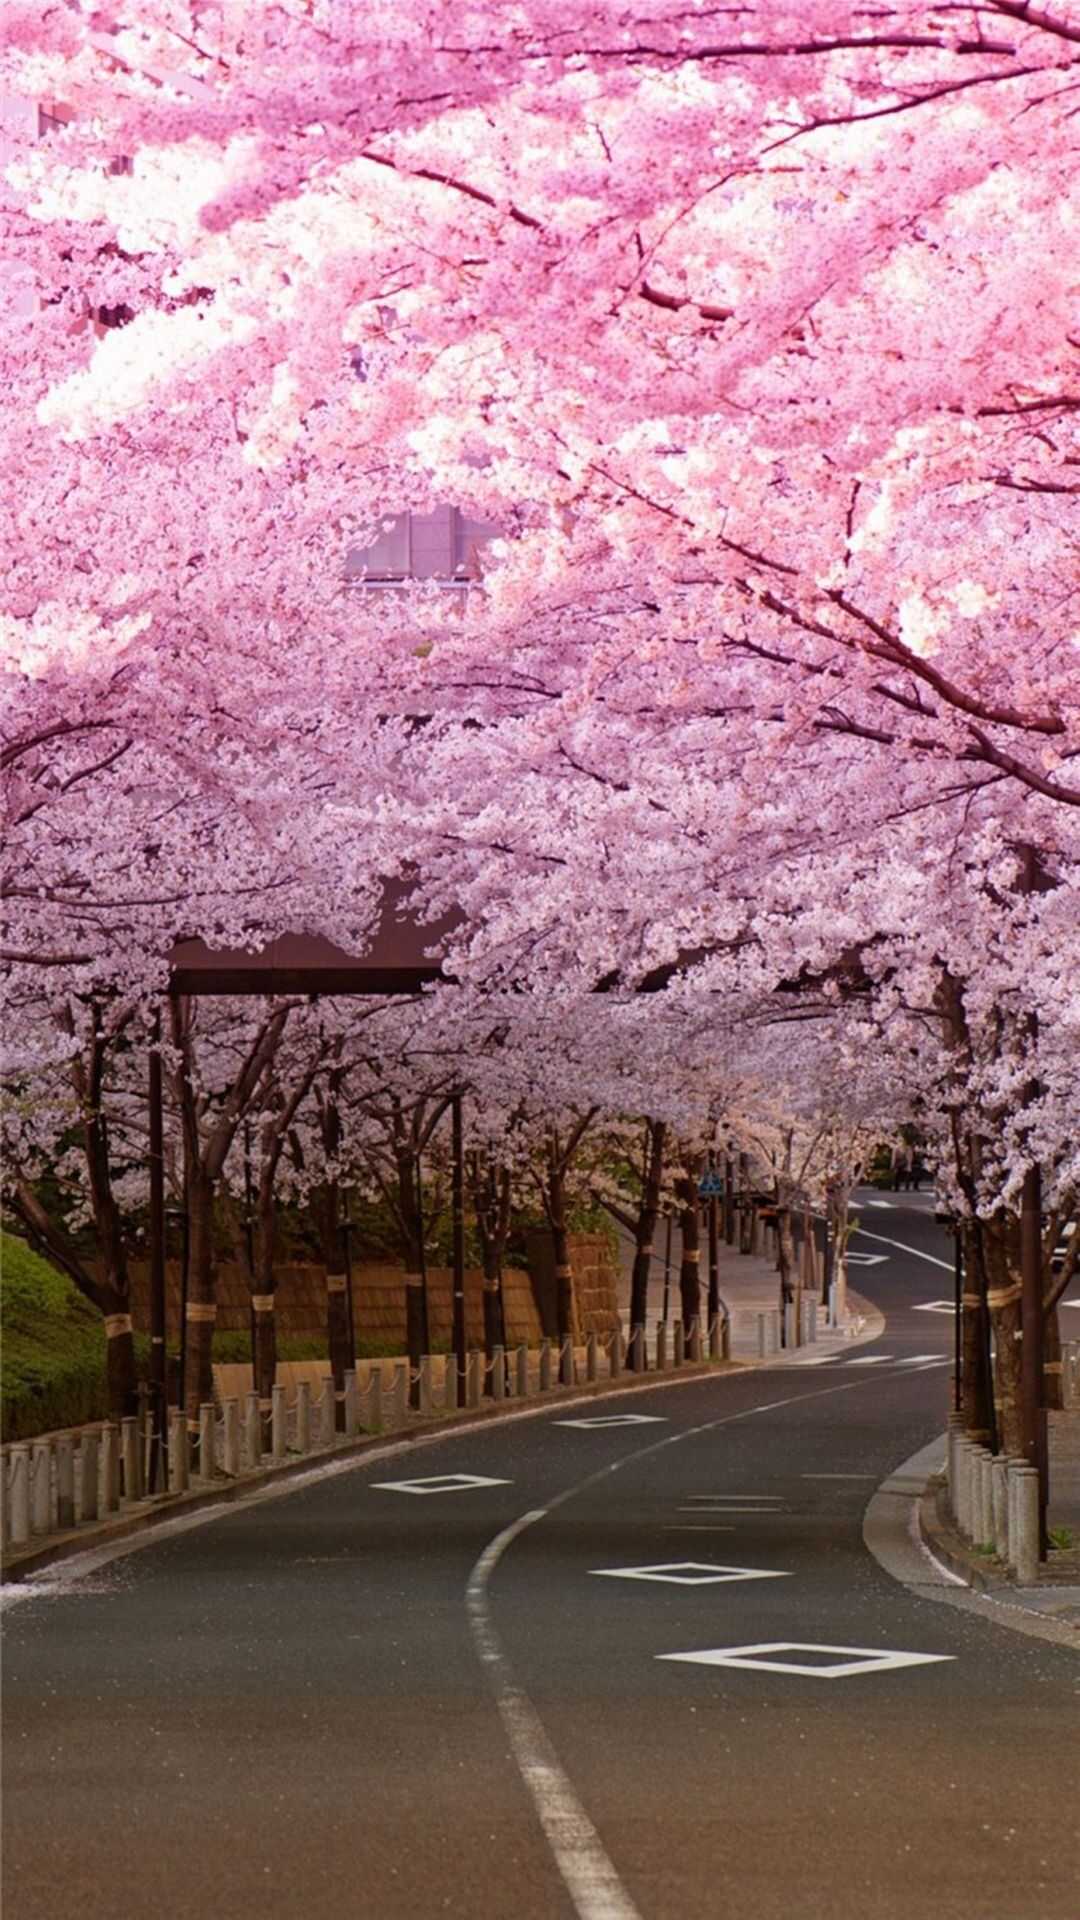 A serene street lined with blooming cherry blossoms. - Cherry blossom